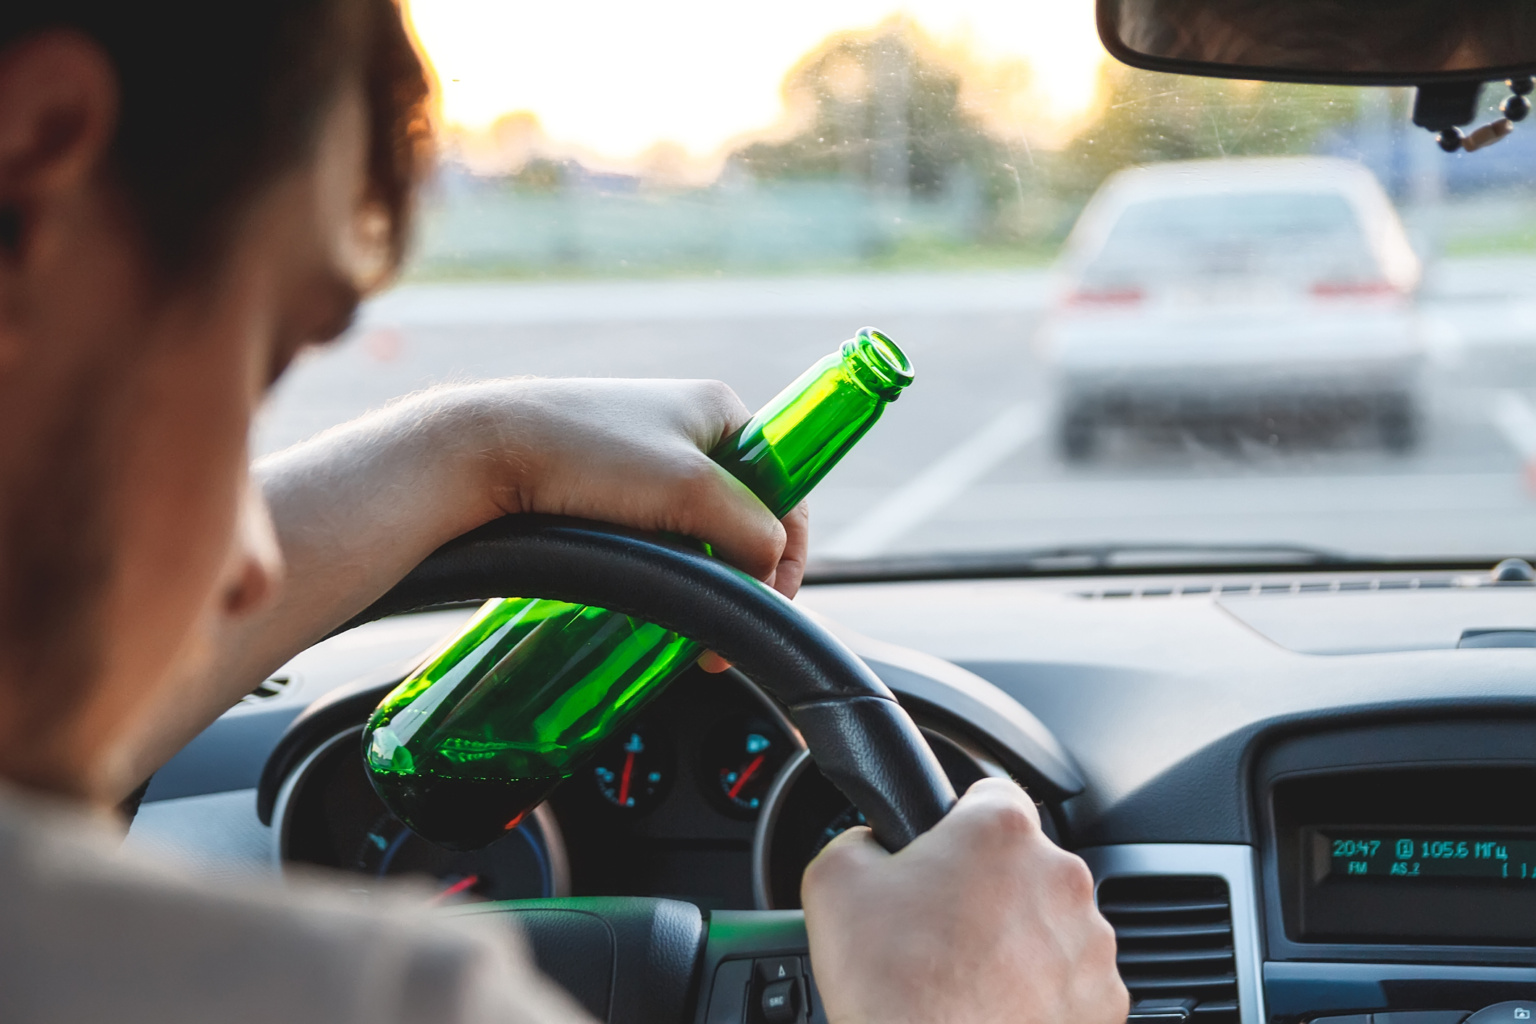 A Man Driving A Car With A Bottle Of Beer